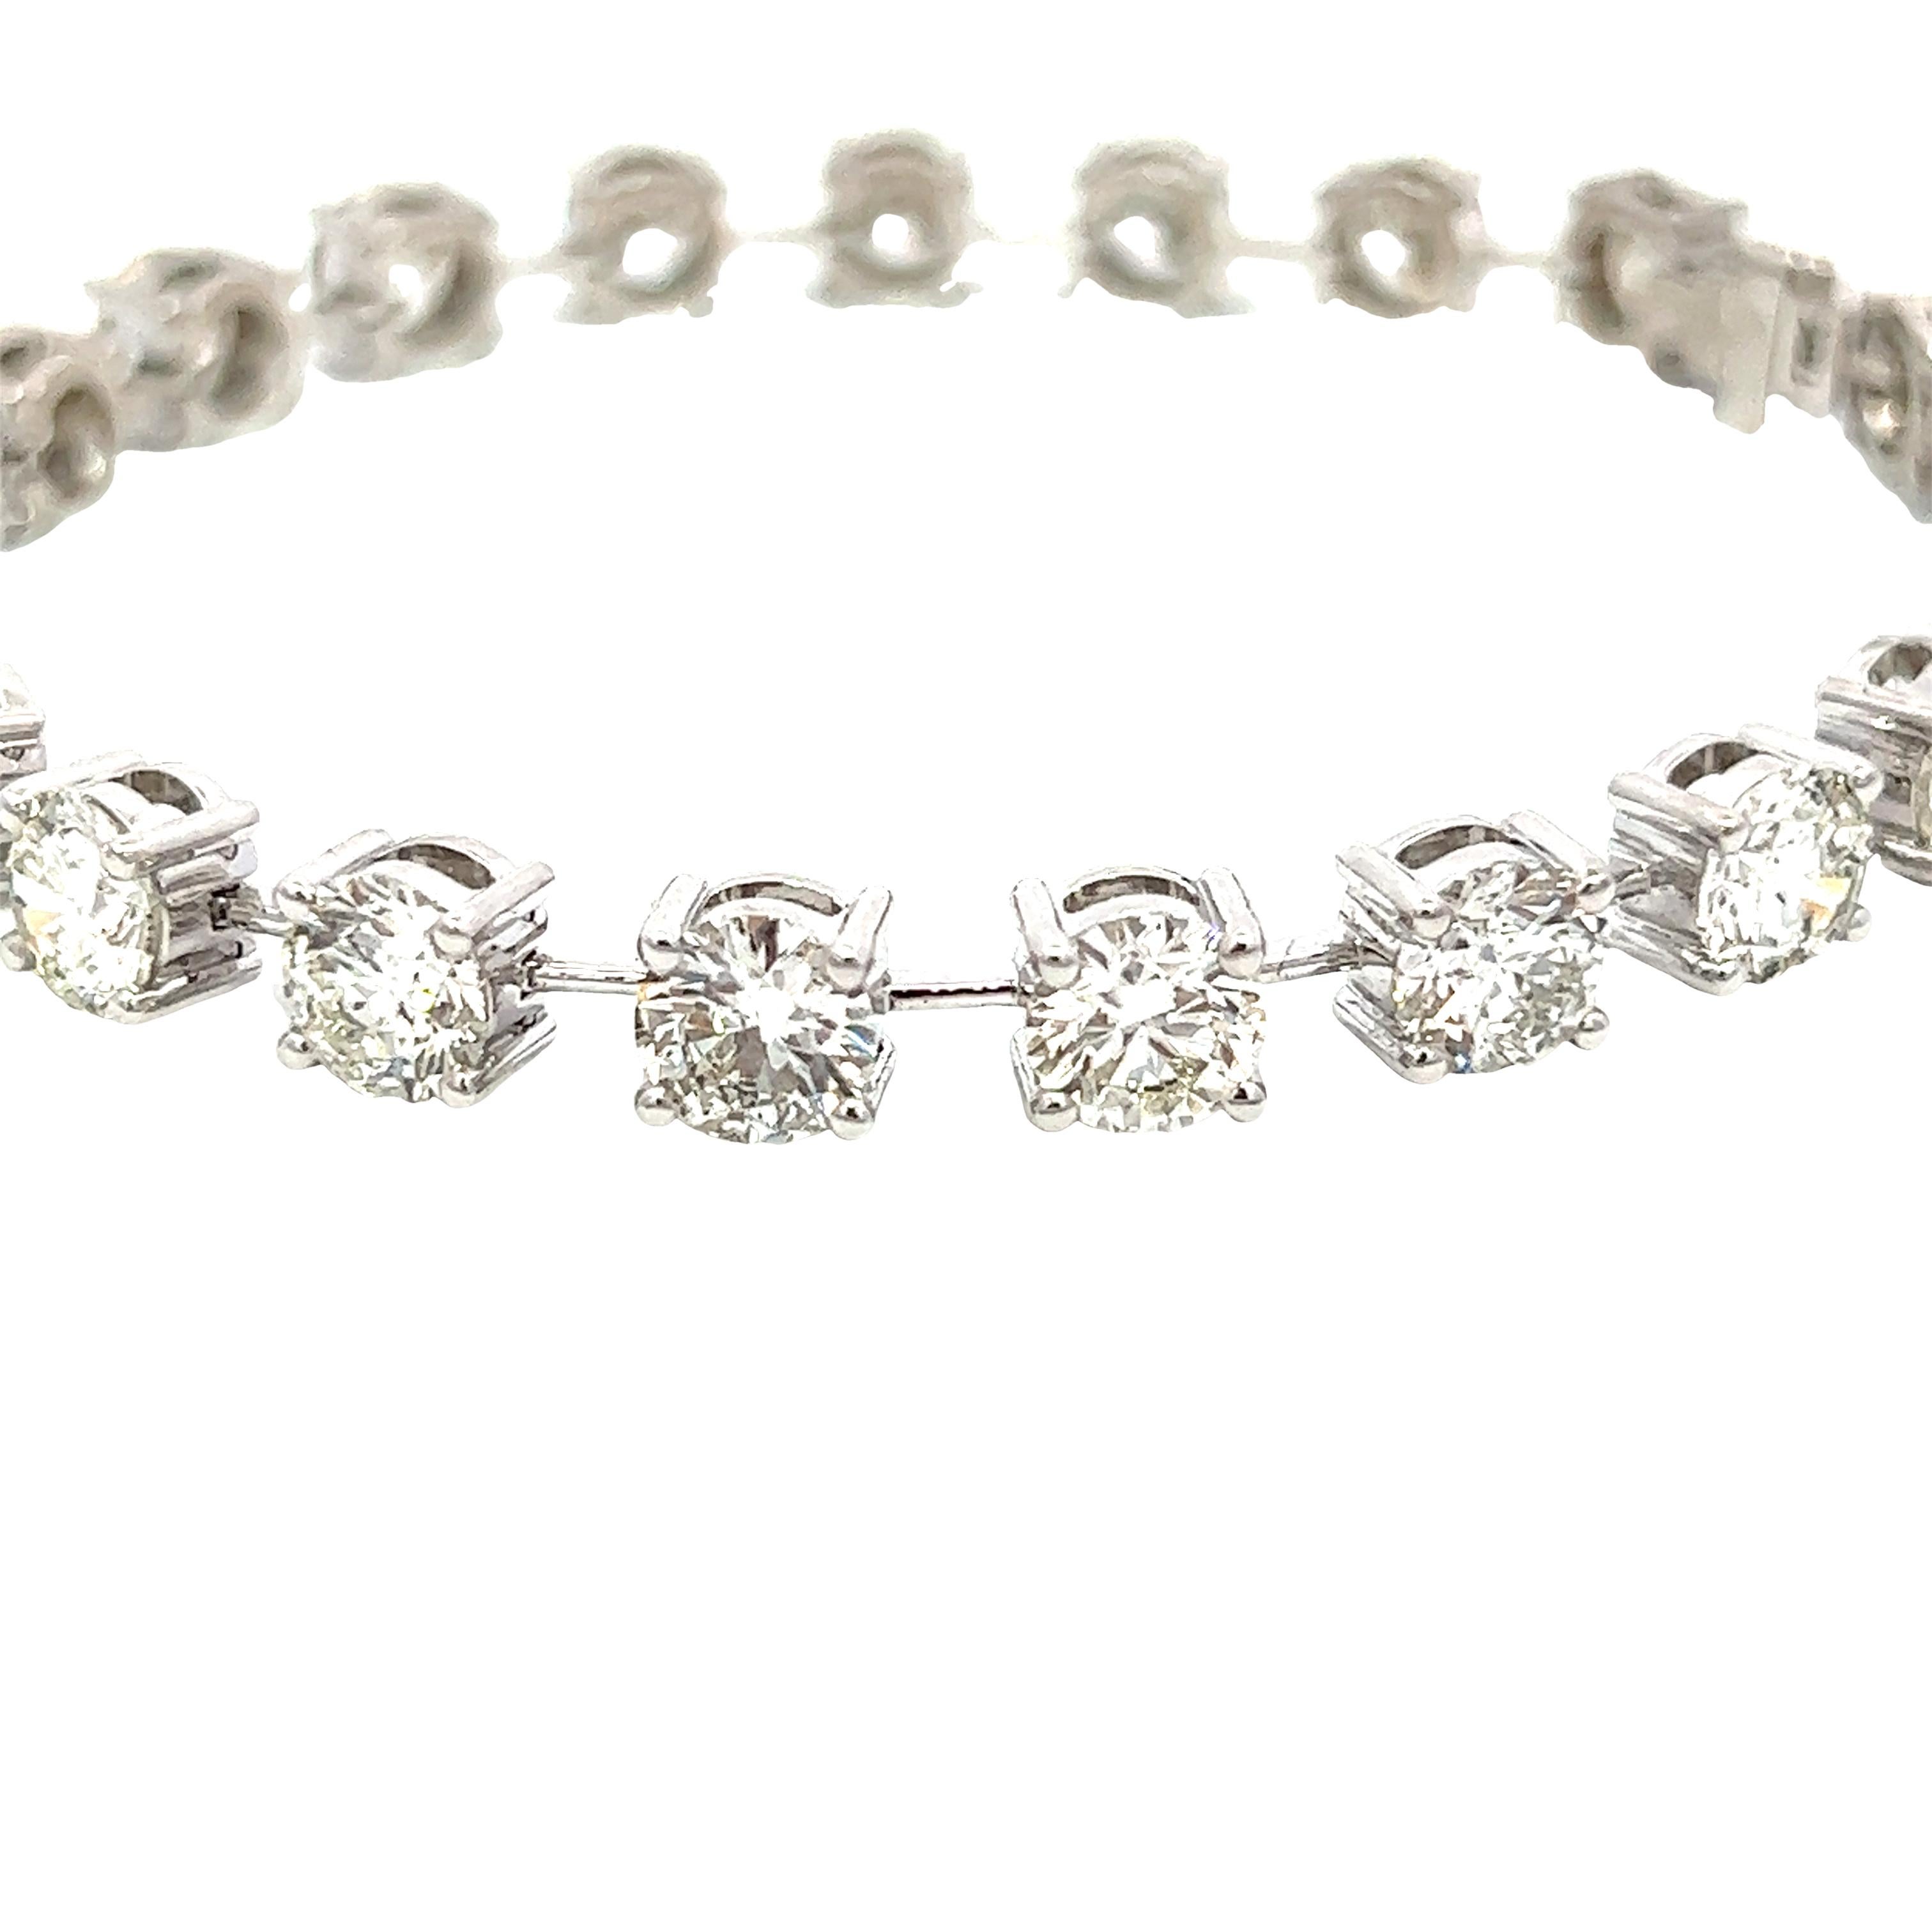 Set in 18k white gold, this 15.15CT round brilliant diamond bracelet features 21 stones. It is 7to your preference. inches long but can be resized 